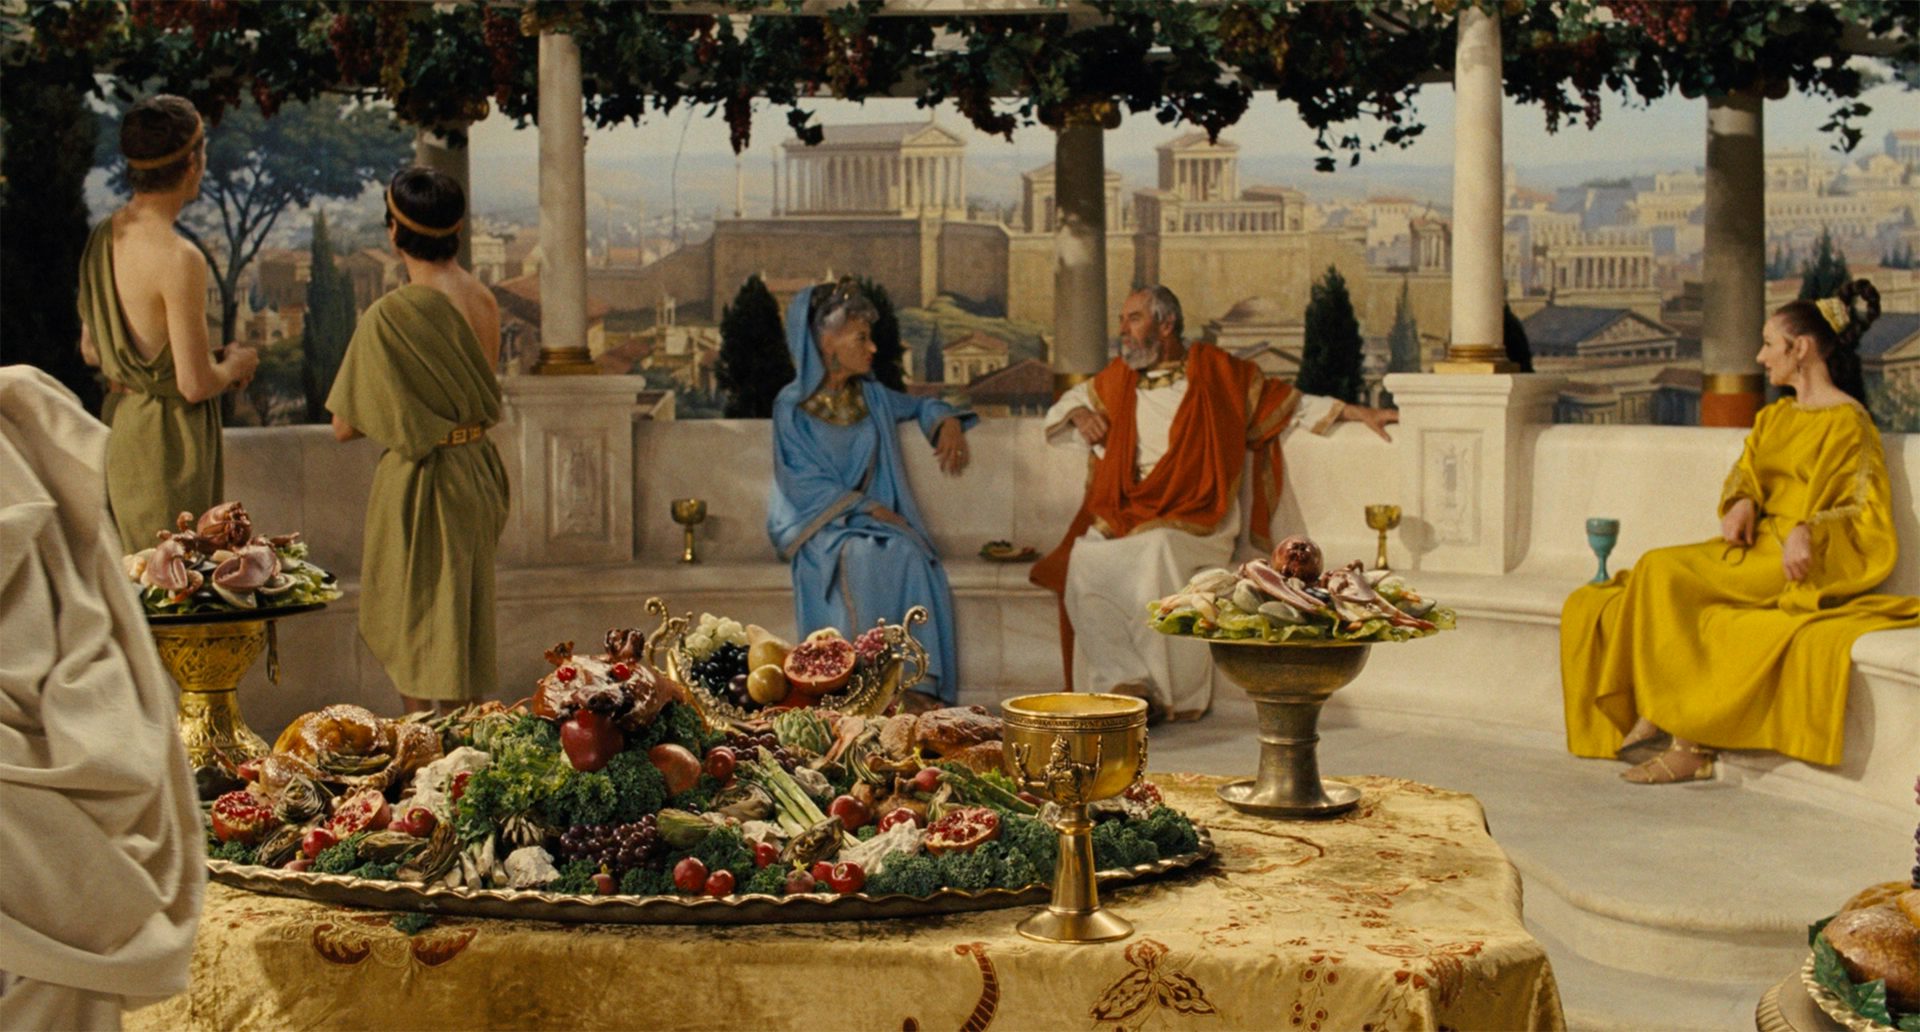 Still from the movie Hail, Caesar showing the Ancient Rome backdrop